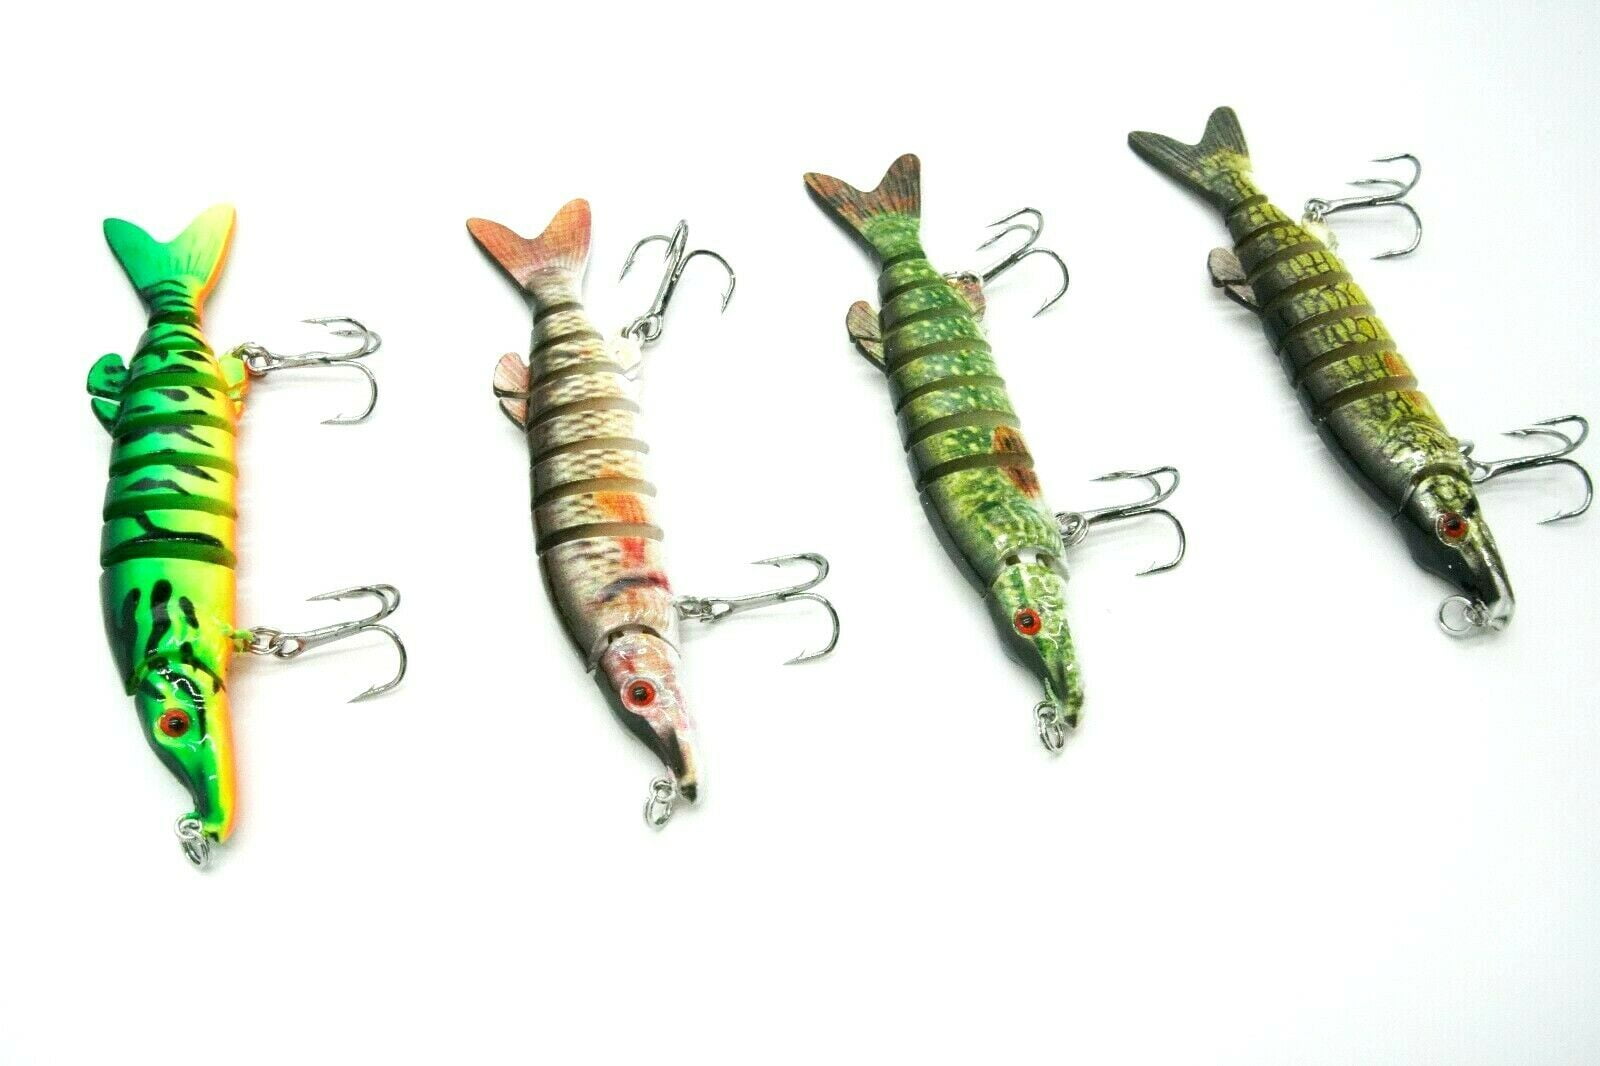 Buy HXC Multi-jointed Fishing Lure Pike Lures Sets Pike Fishing